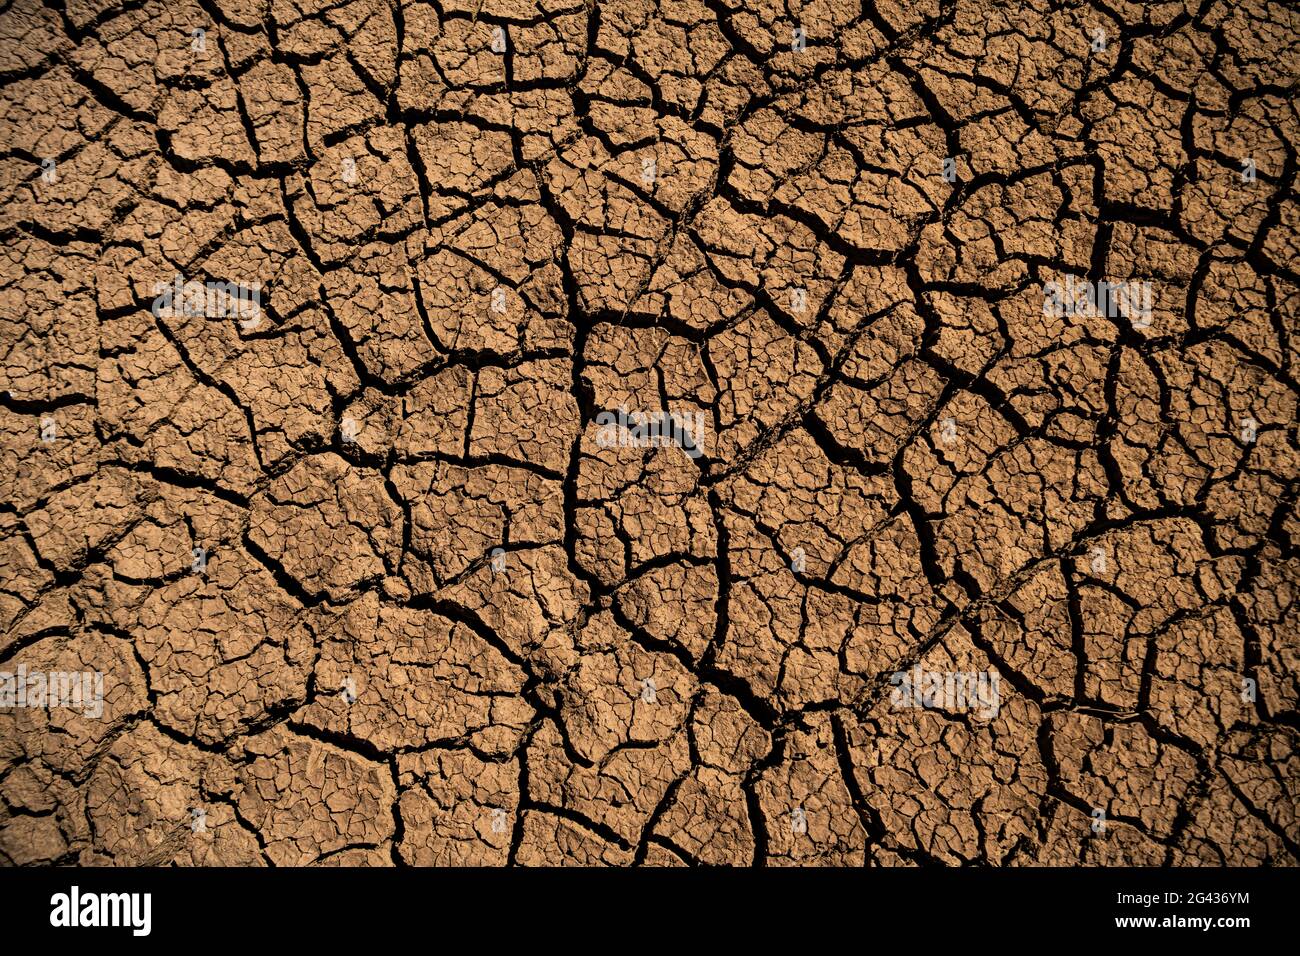 Brown dry ground with cracks Stock Photo